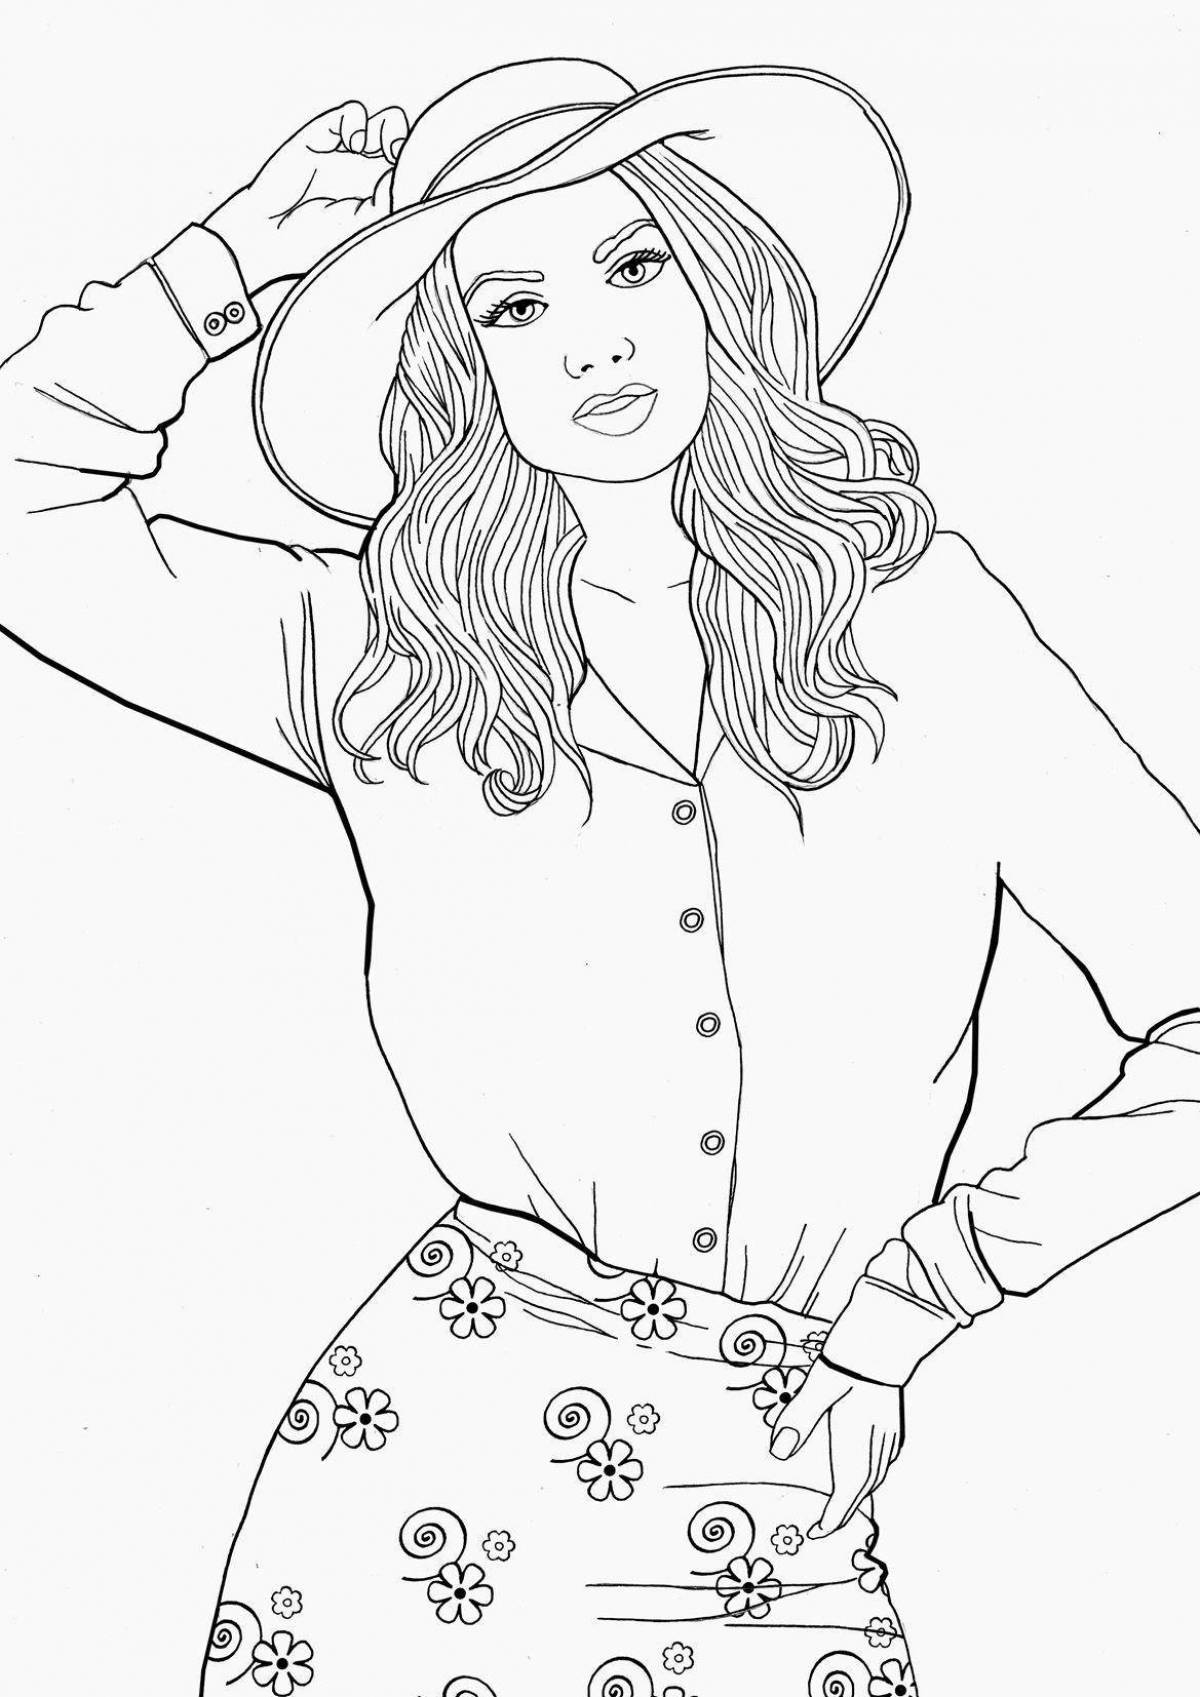 Awesome fashion girls coloring pages